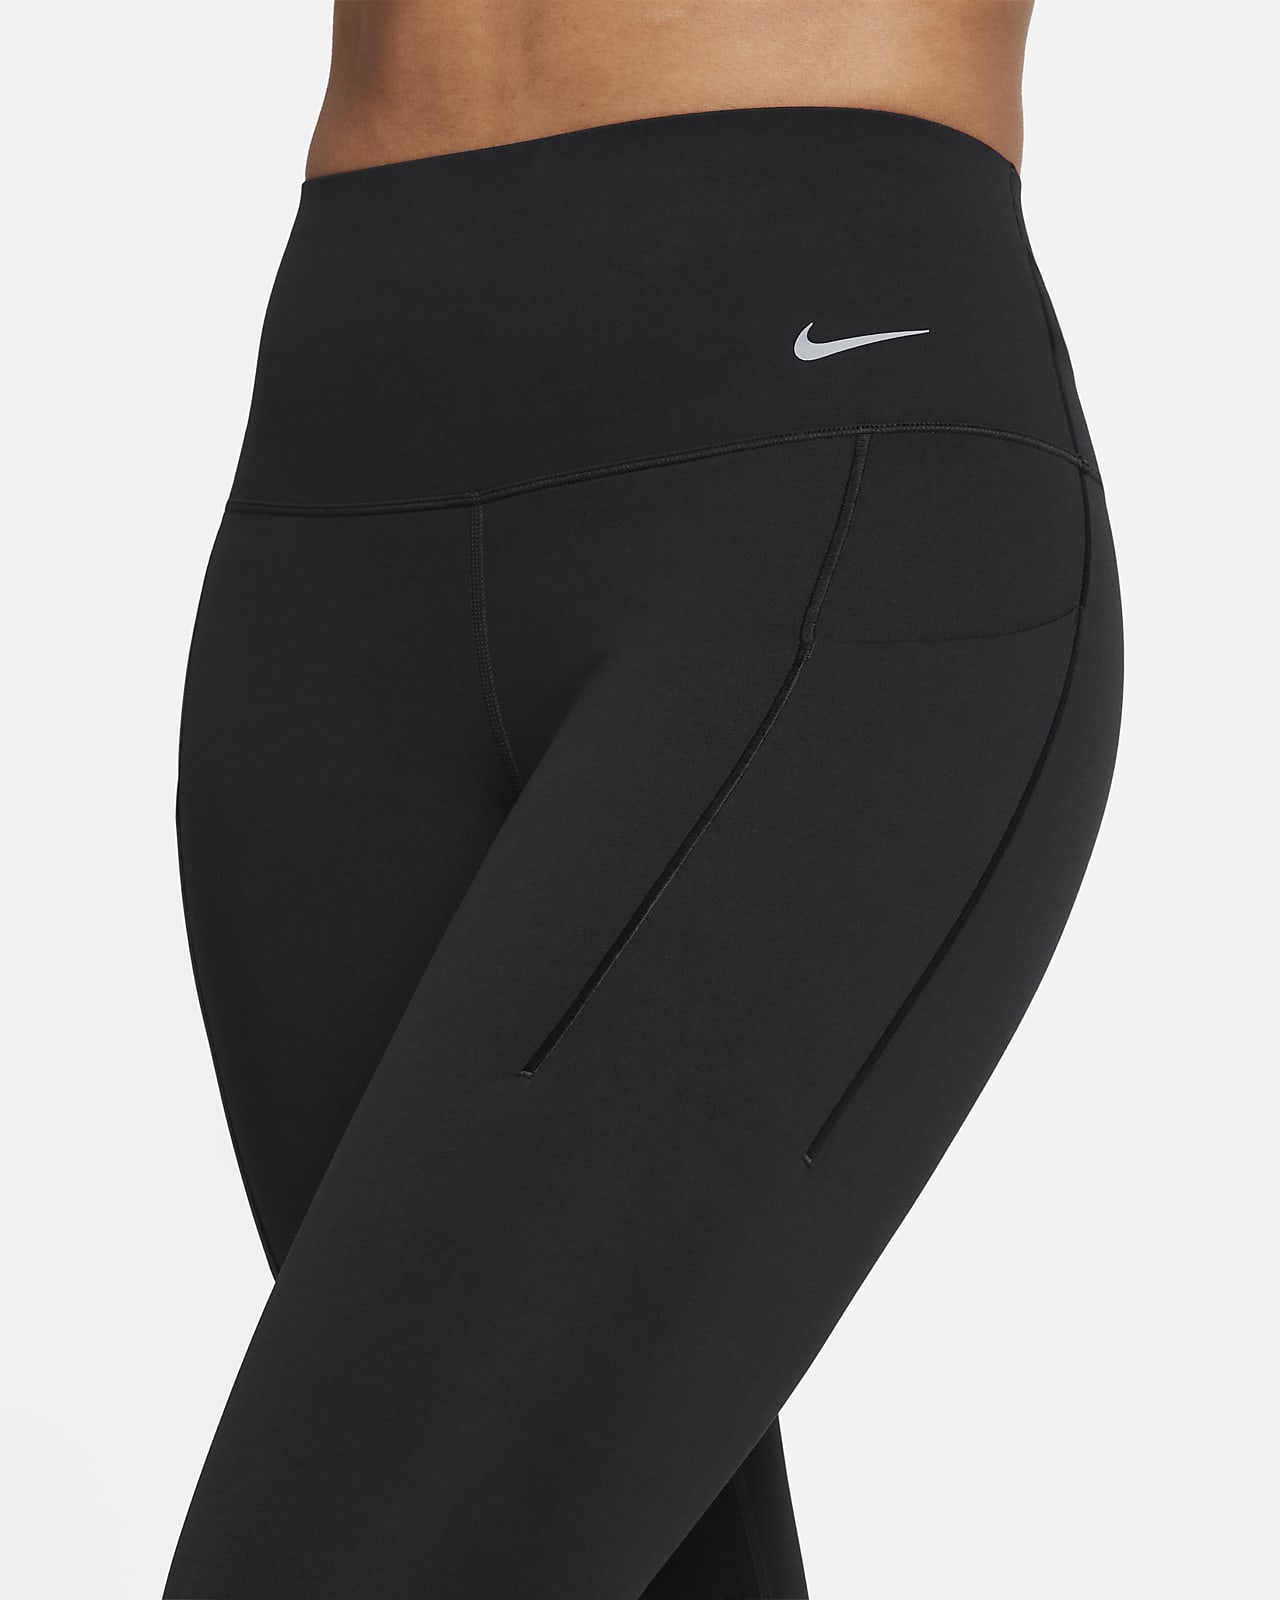 Lands' End Womens Active Crop Yoga Pant Black Tall X-Small at